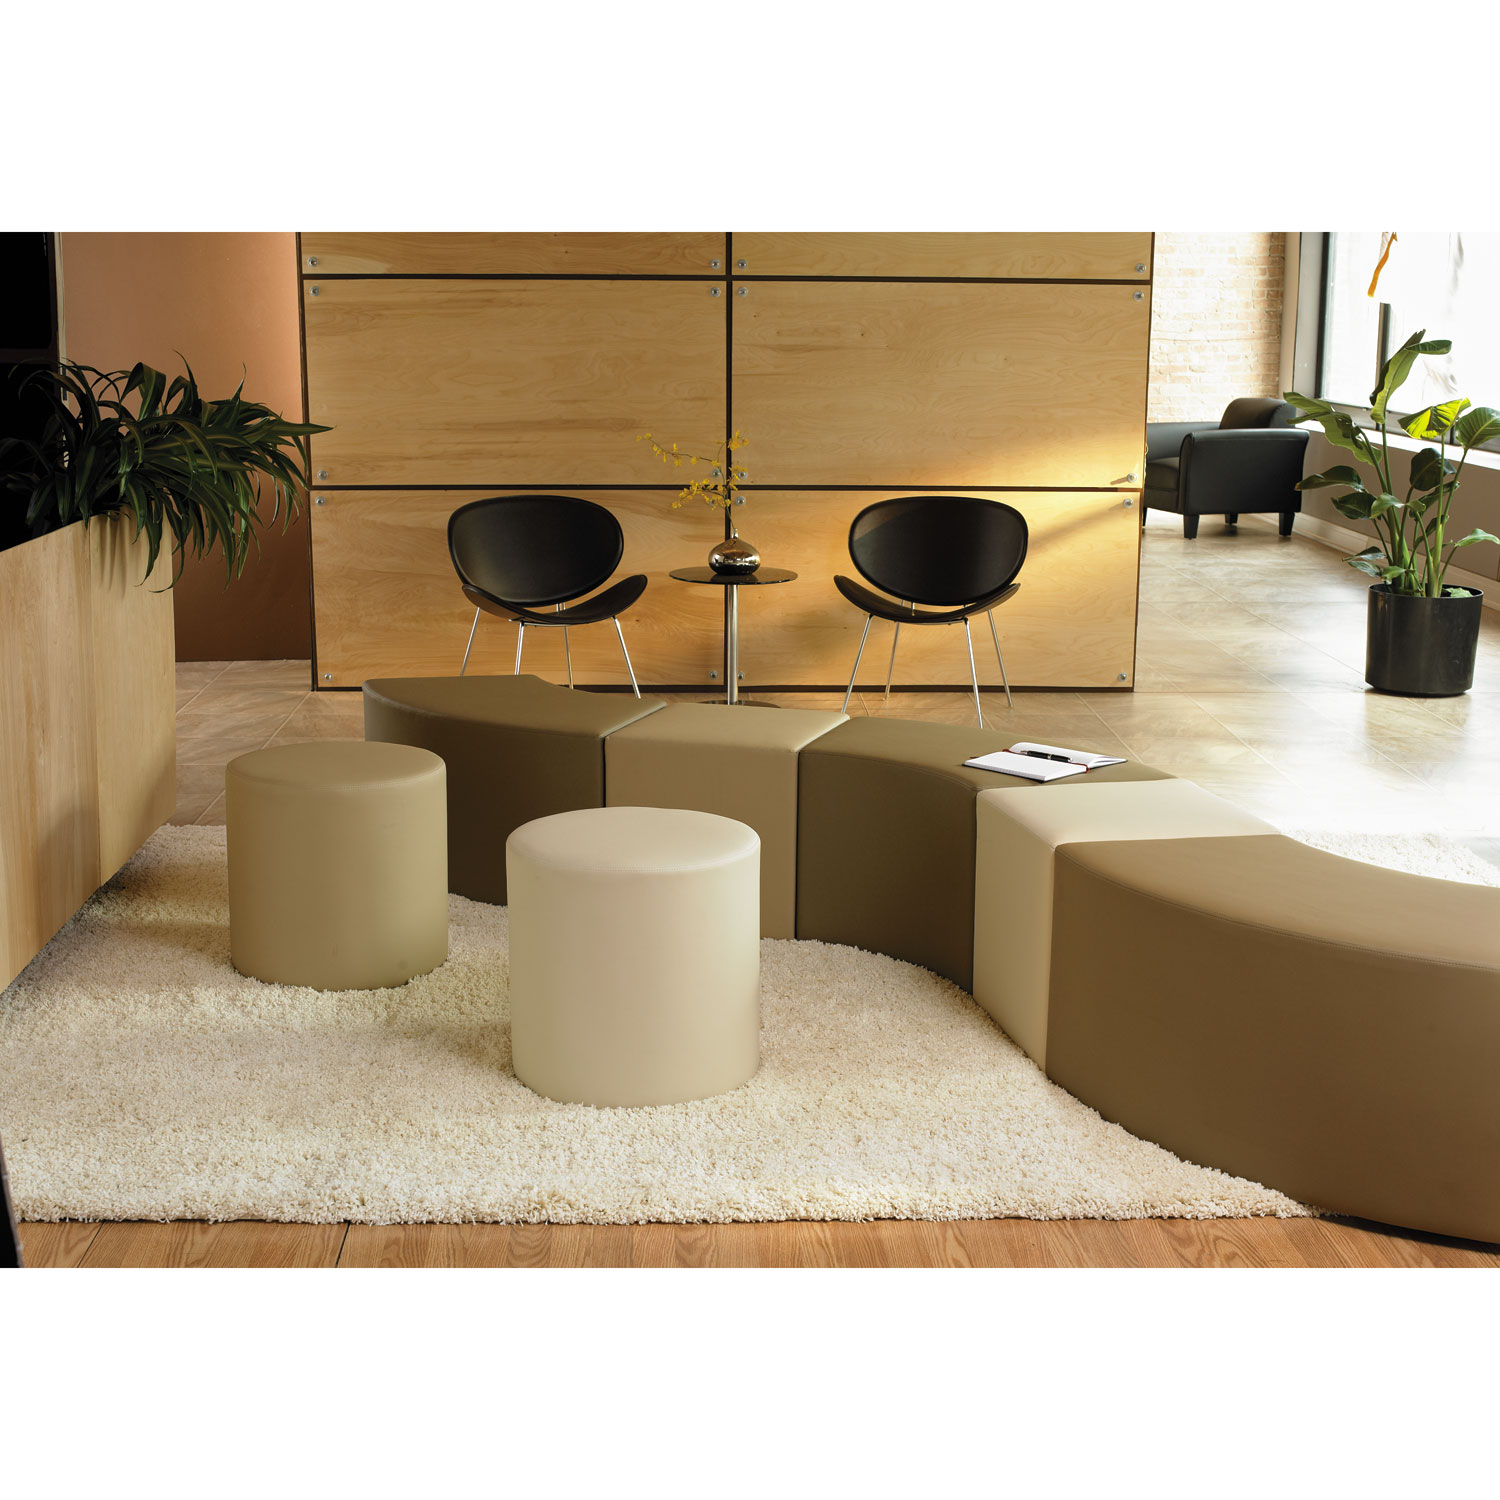 Alera WE Series Collaboration Seating, Cube Bench, 18 x 18 x 18, Almond